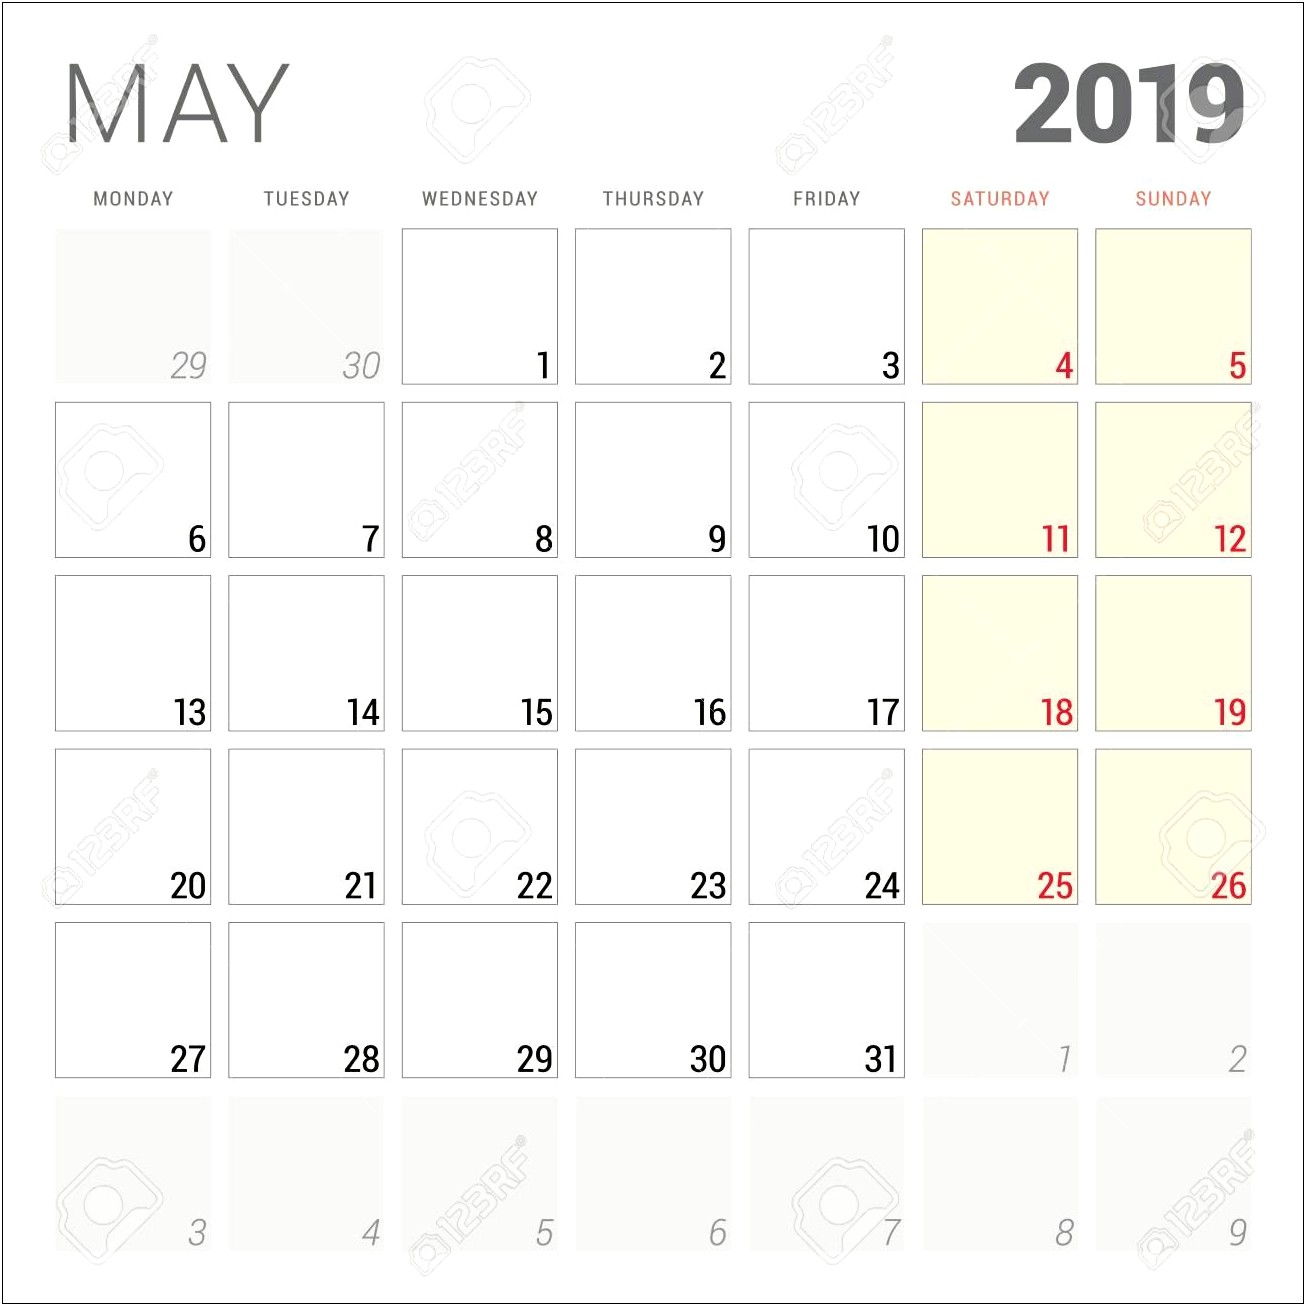 Free Planner Templates For May 2019